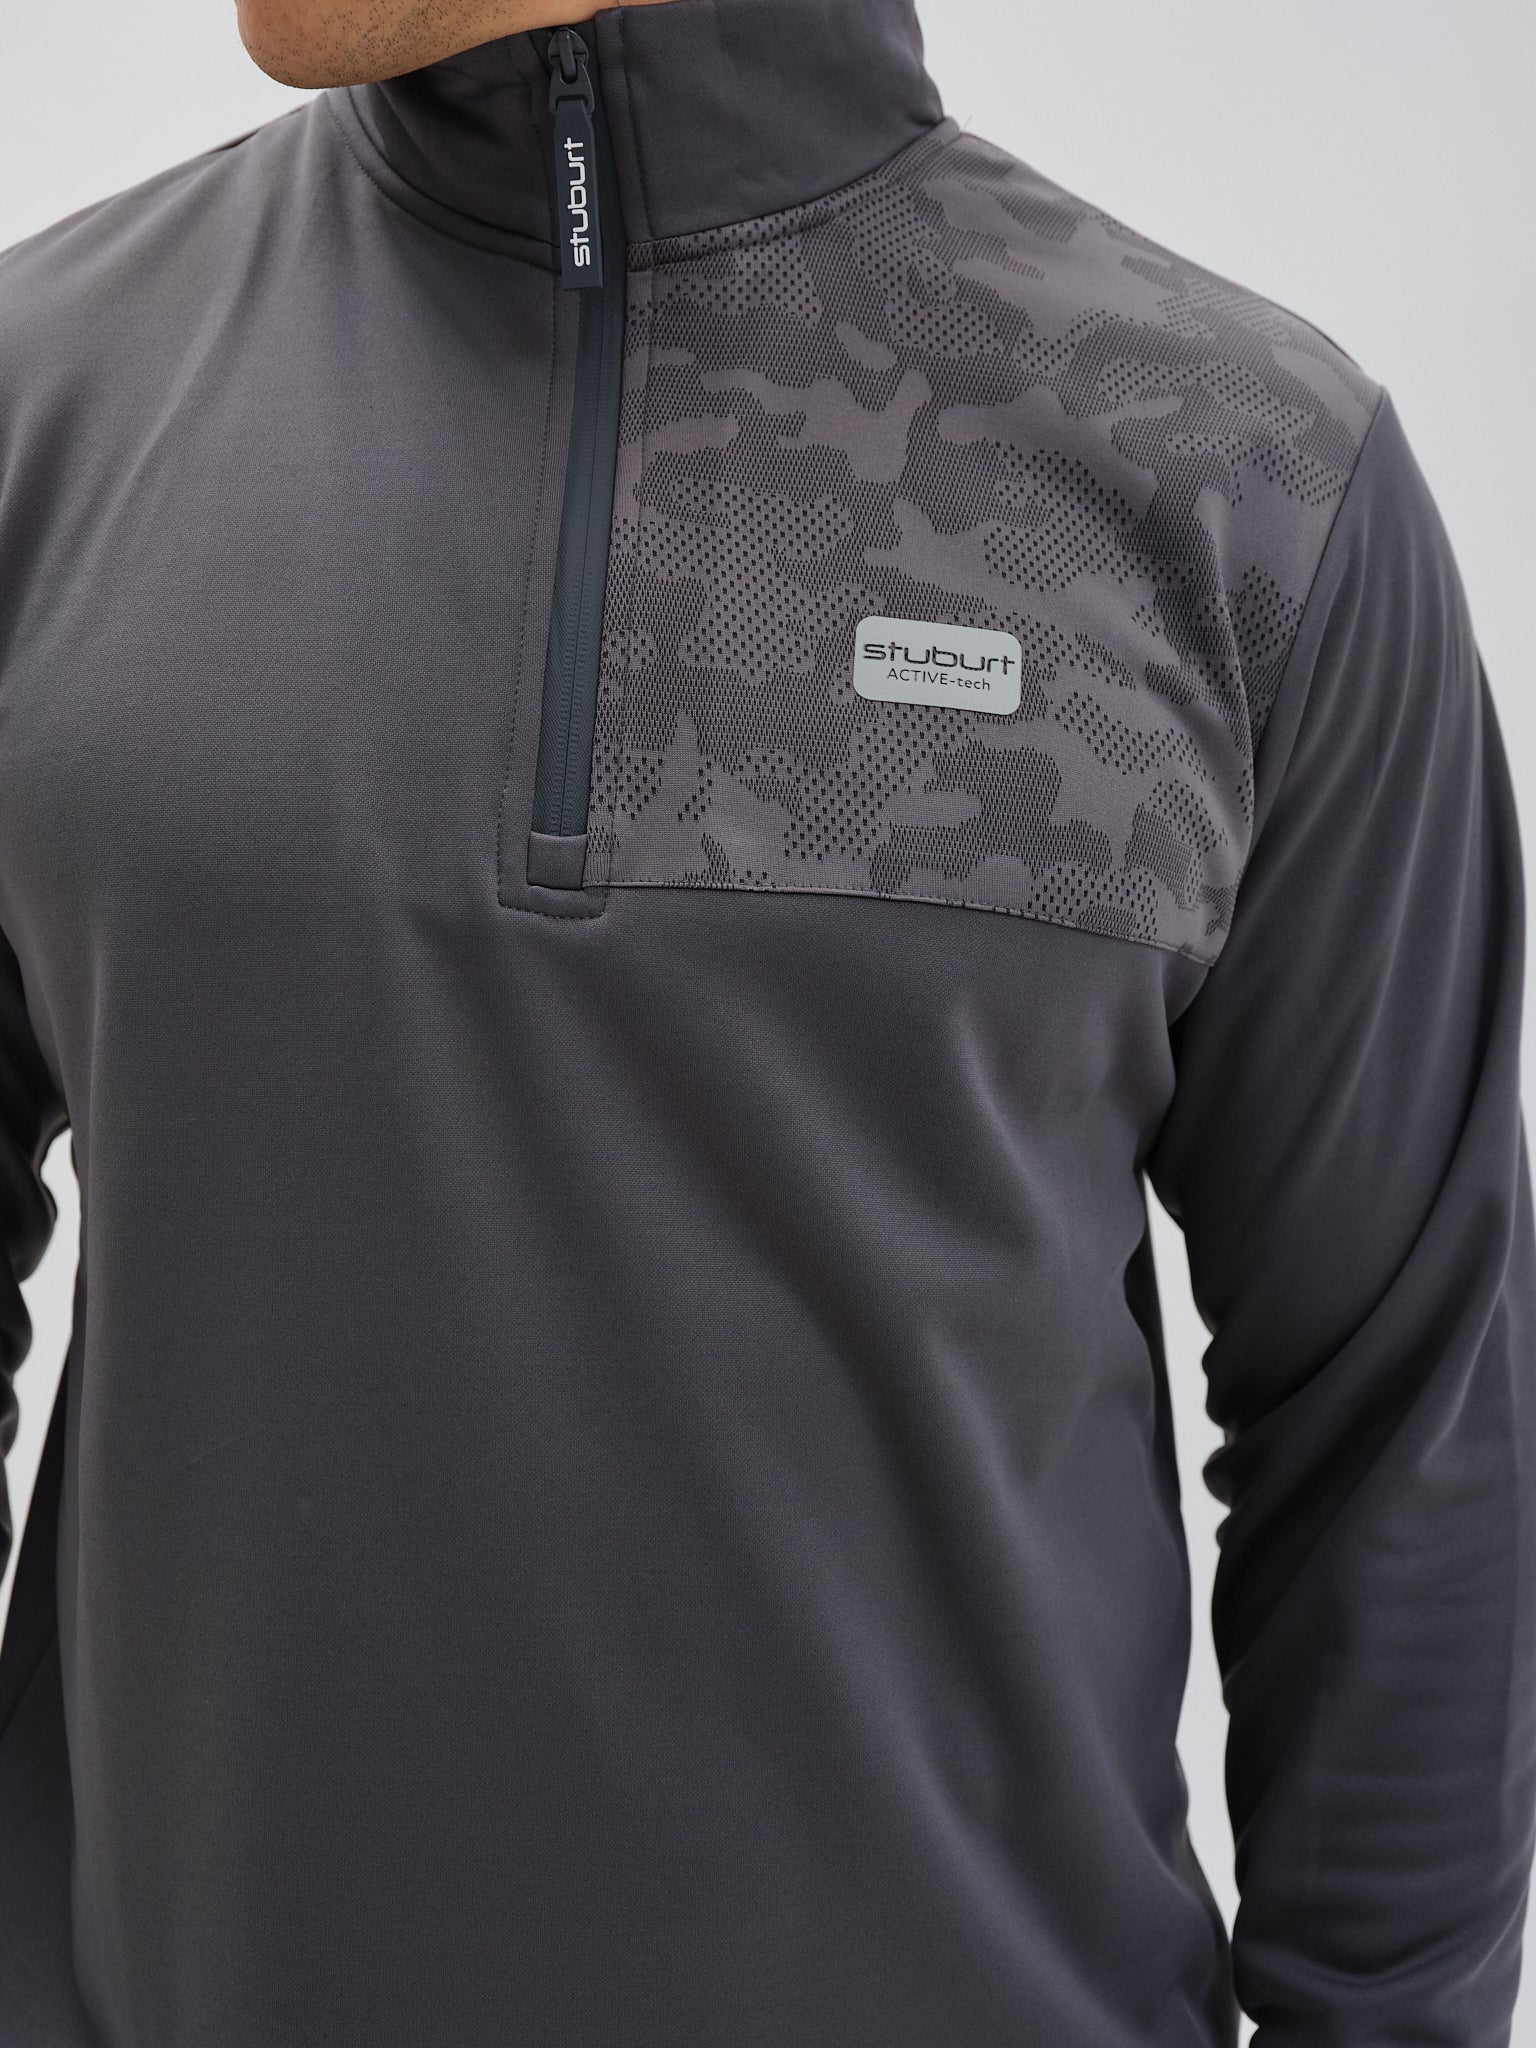 Active-tech Mid Layer.